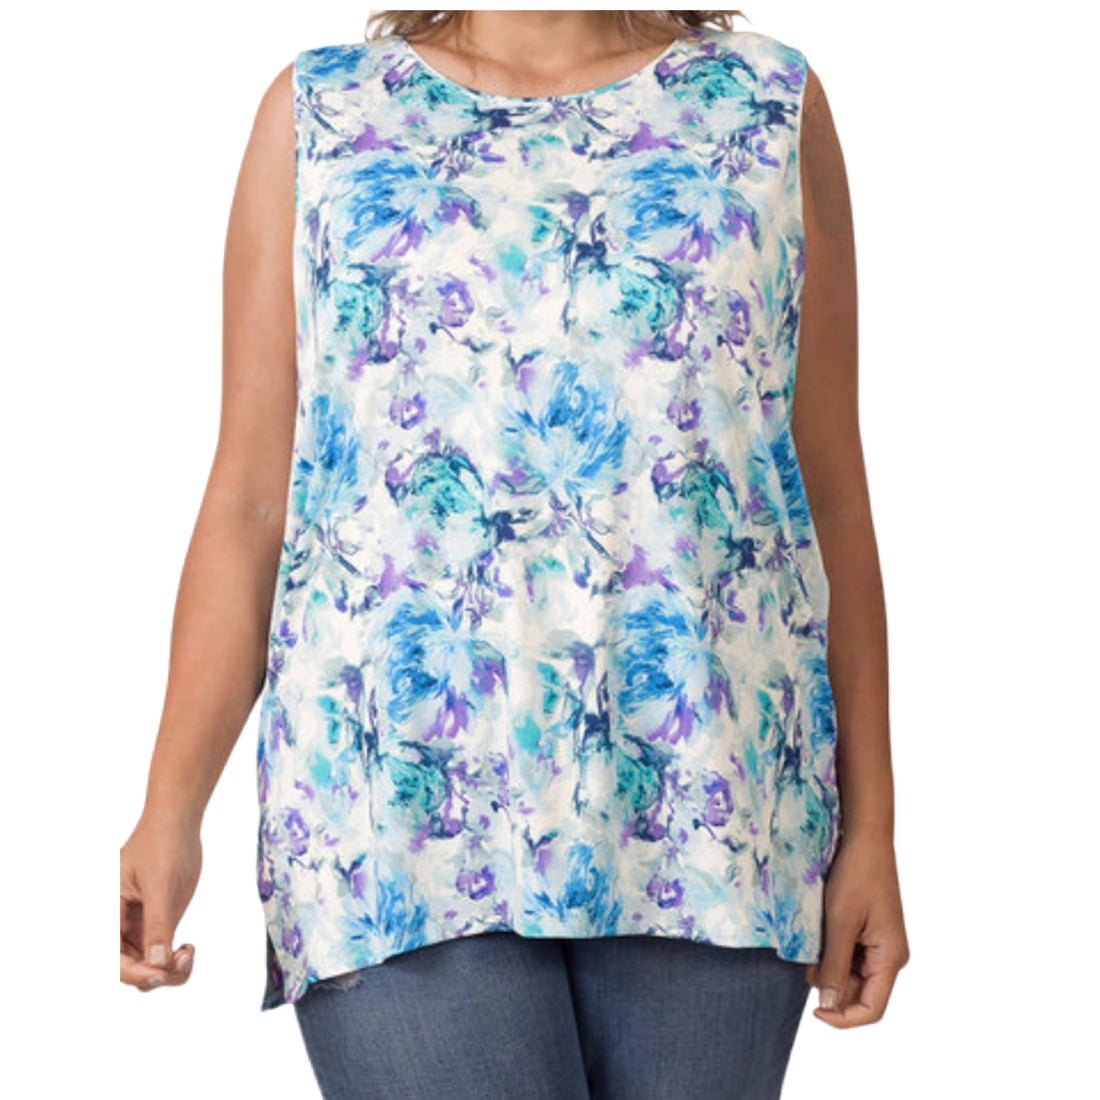 Blue Floral Sleeveless Top